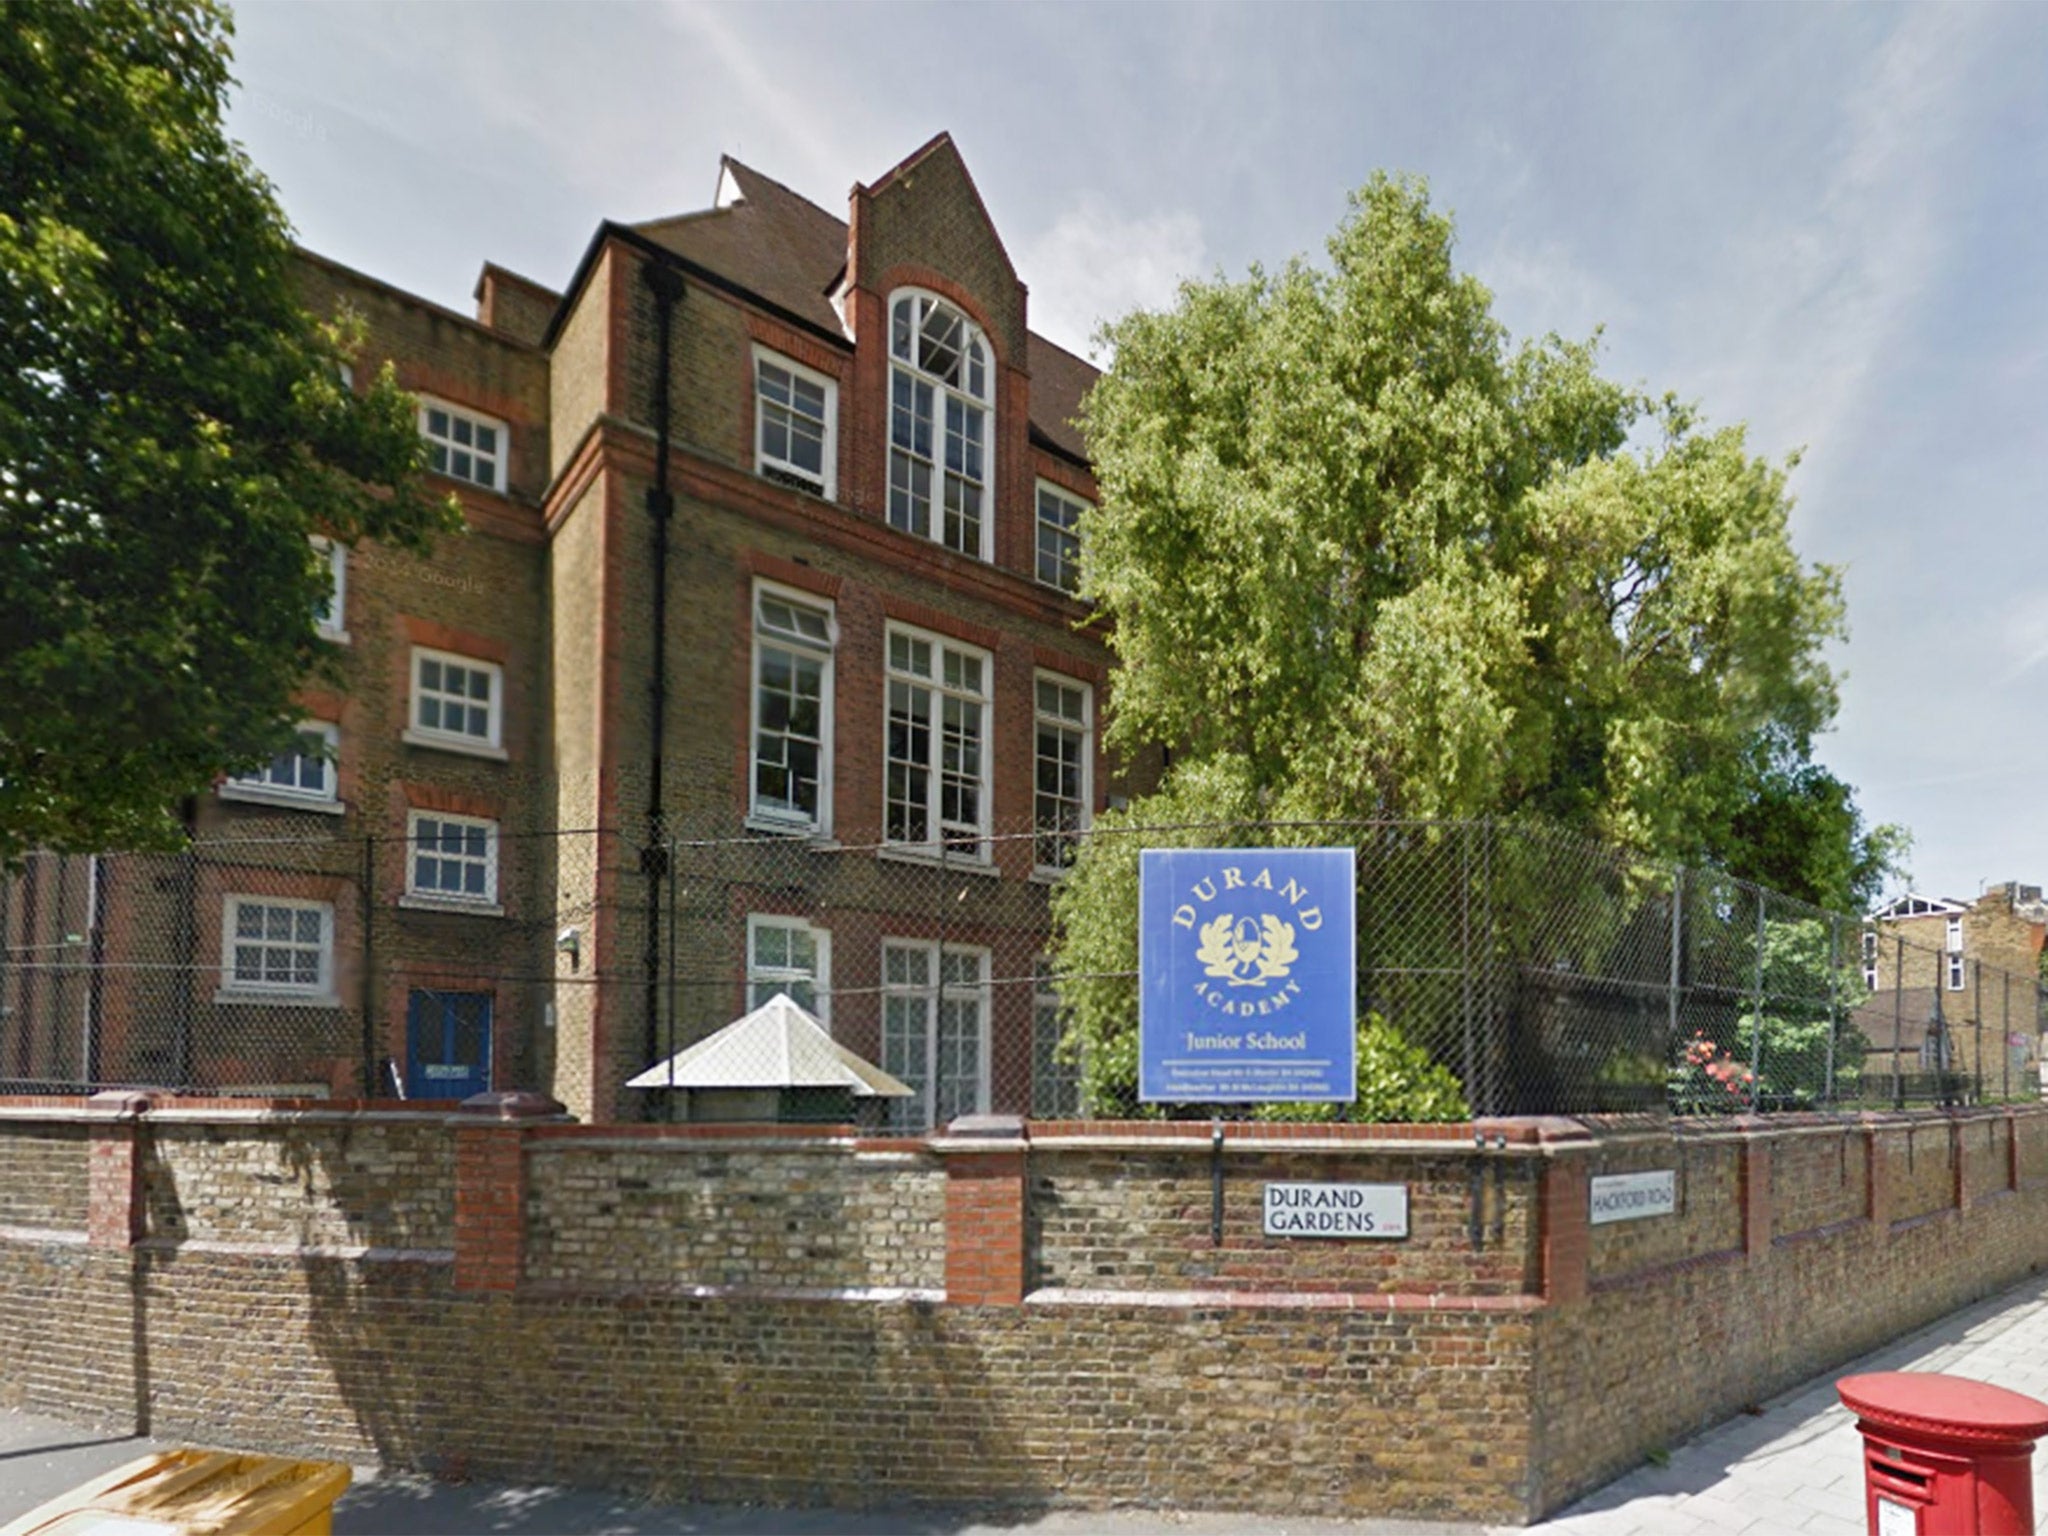 Durand Academy in Stockwell, south London (Google)